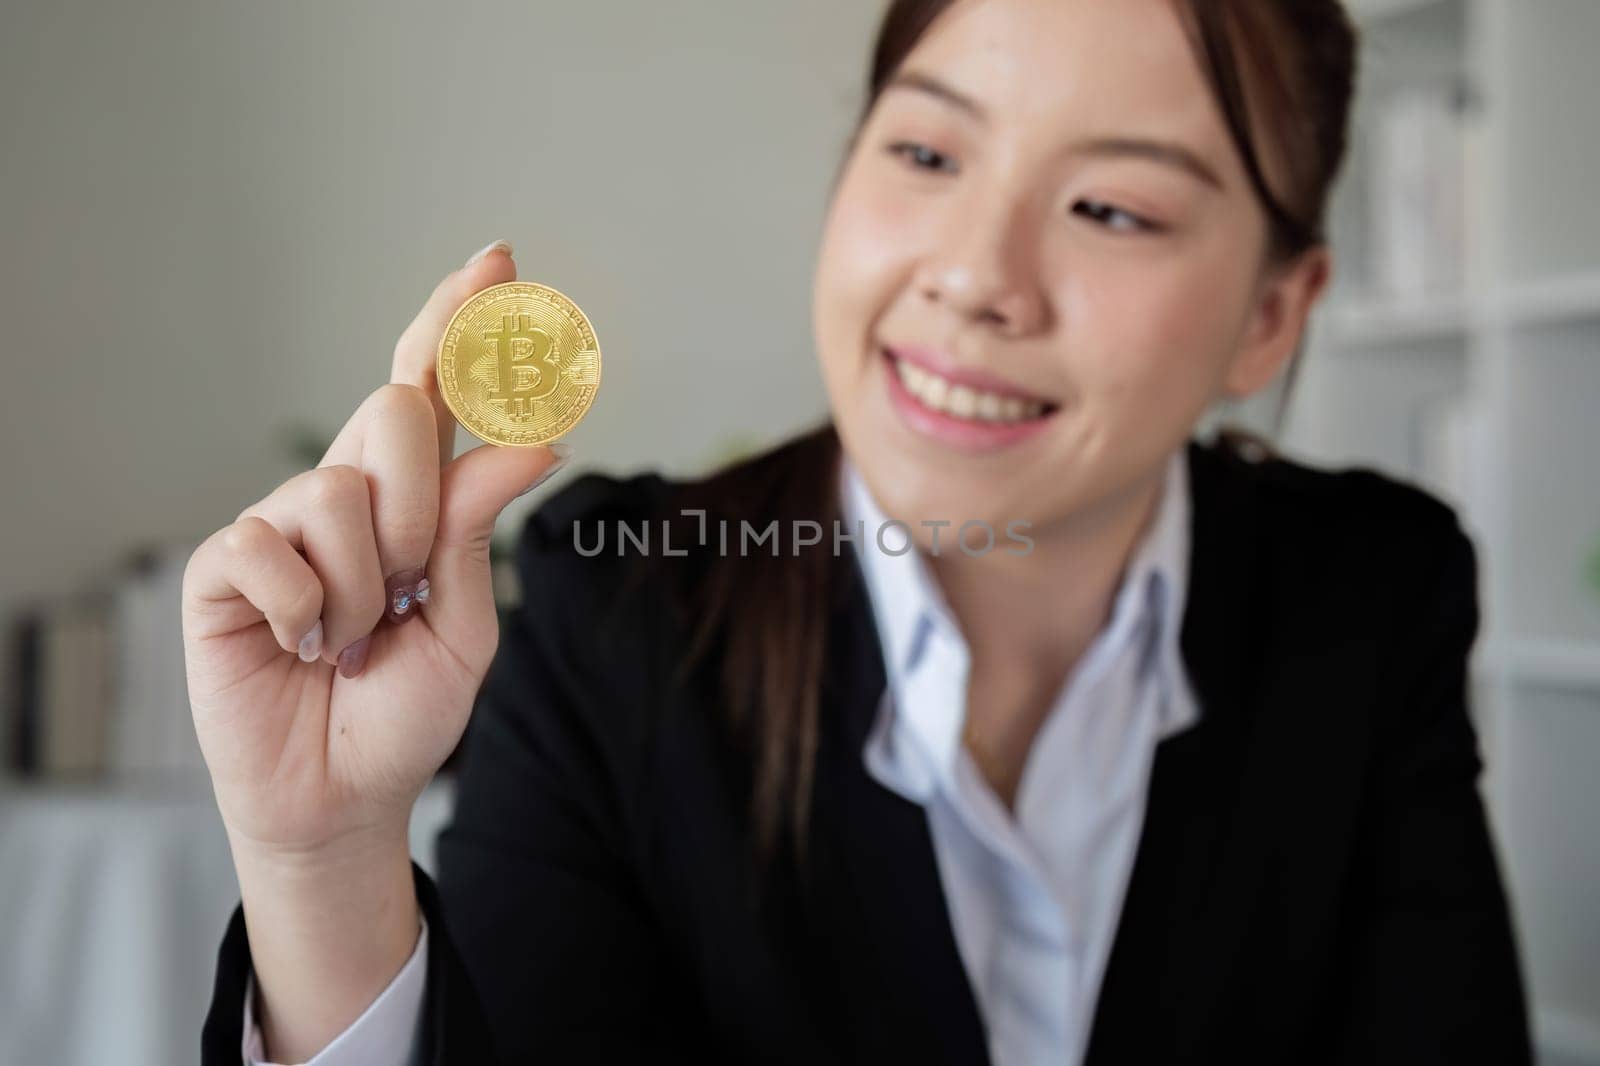 A successful business woman holds the cryptocurrency Bitcoin in her hands. Concept of trading and using digital currencies.